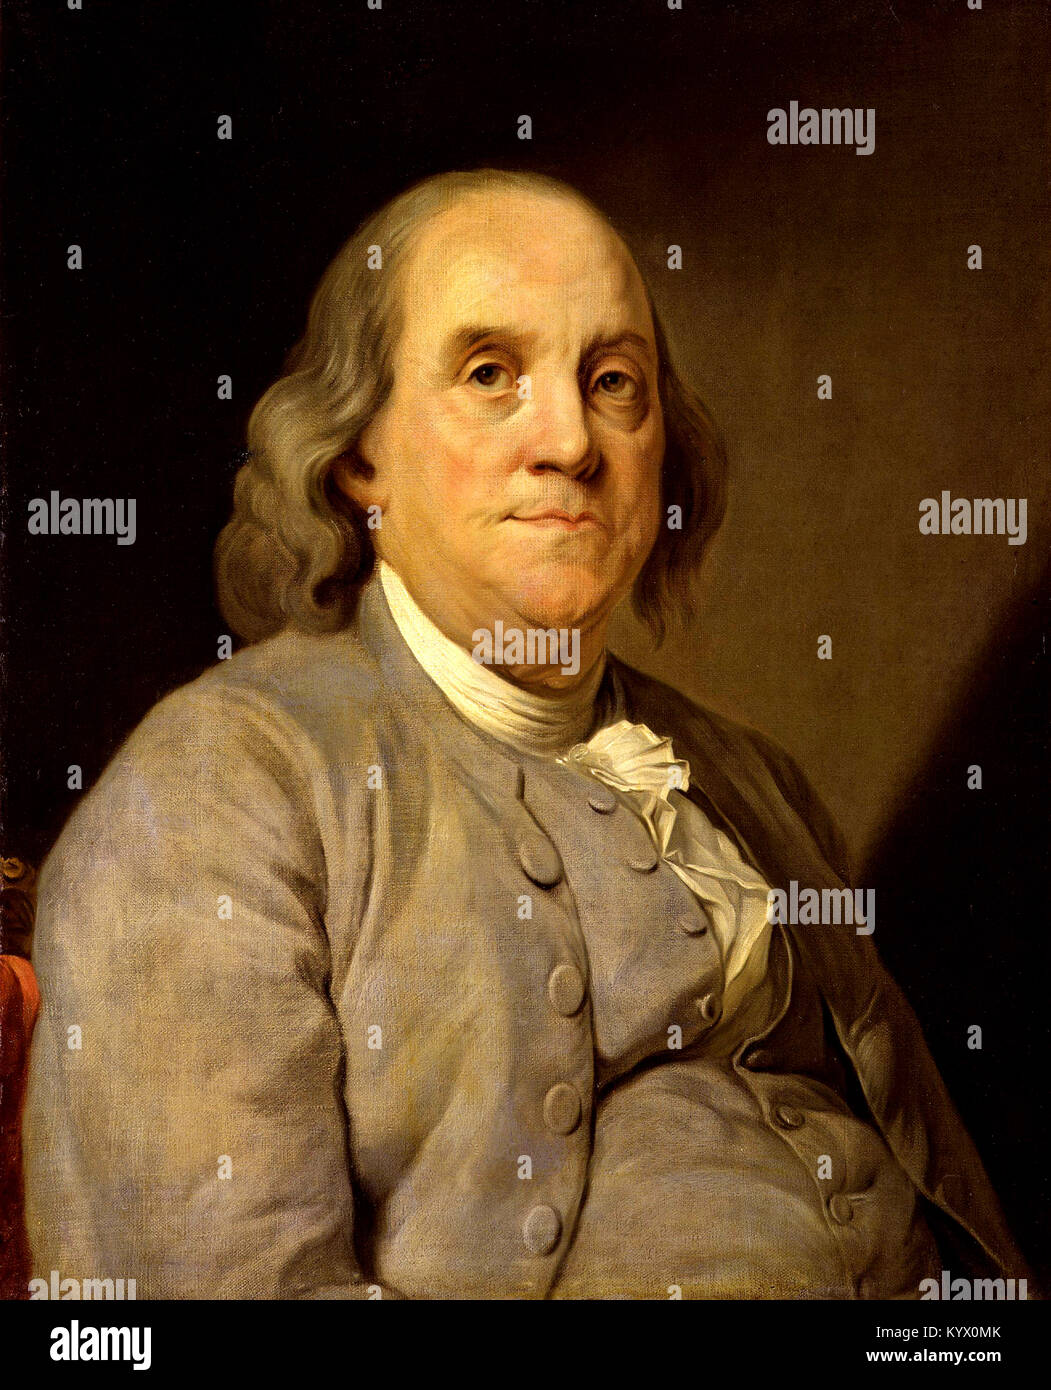 Benjamin Franklin (1706-90) American statesman, printer and scientist. Benjamin Franklin, one of the Founding Fathers of the United States Stock Photo